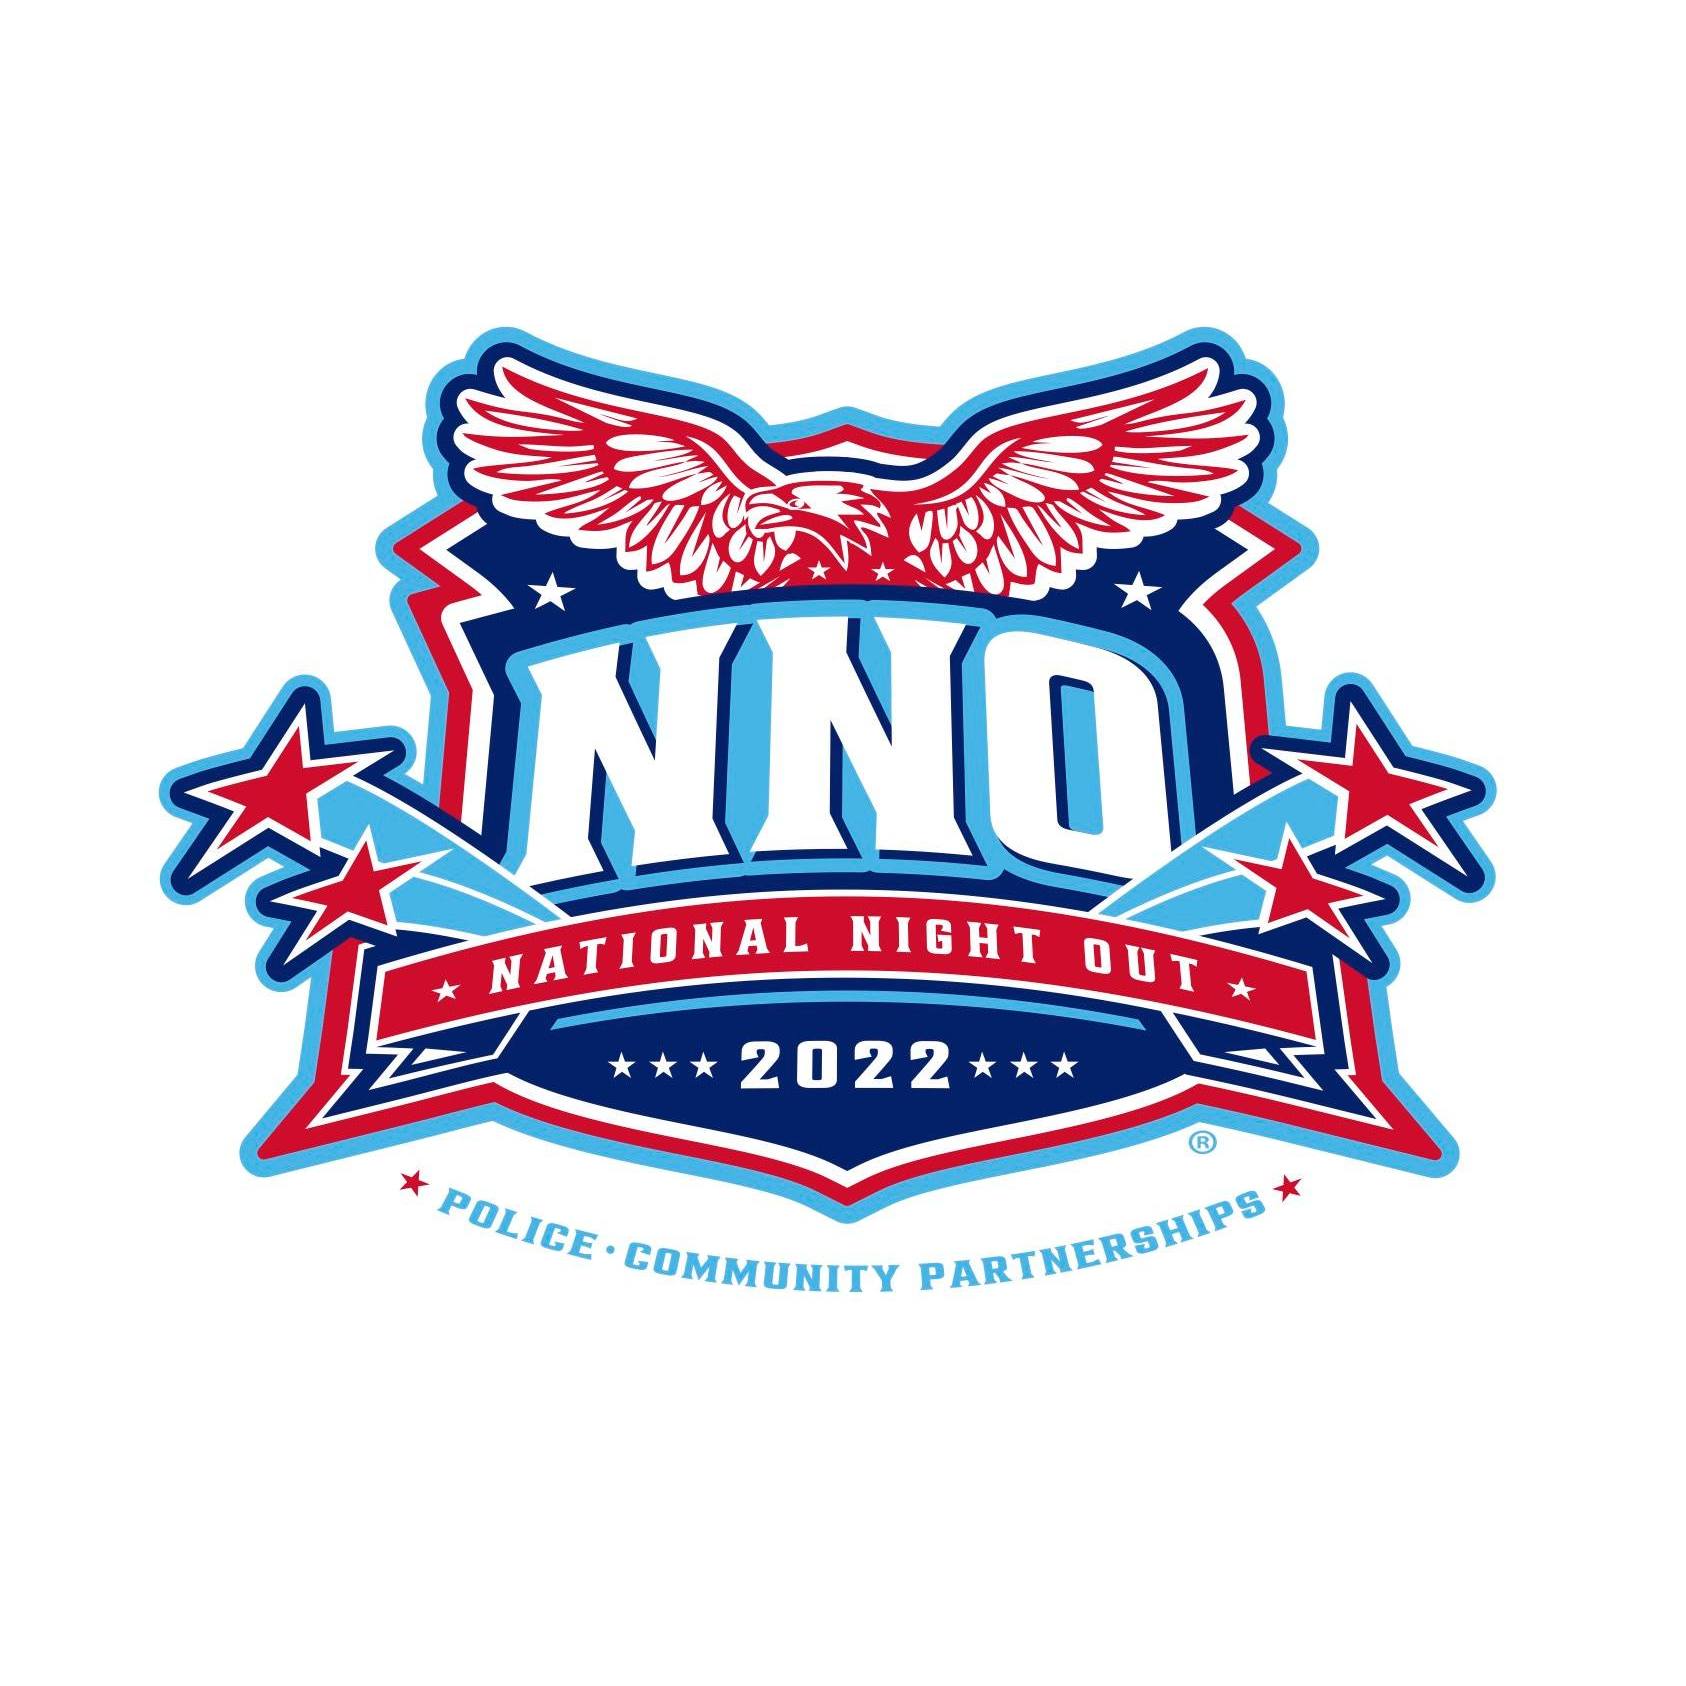 New London Police Department - National Night Out